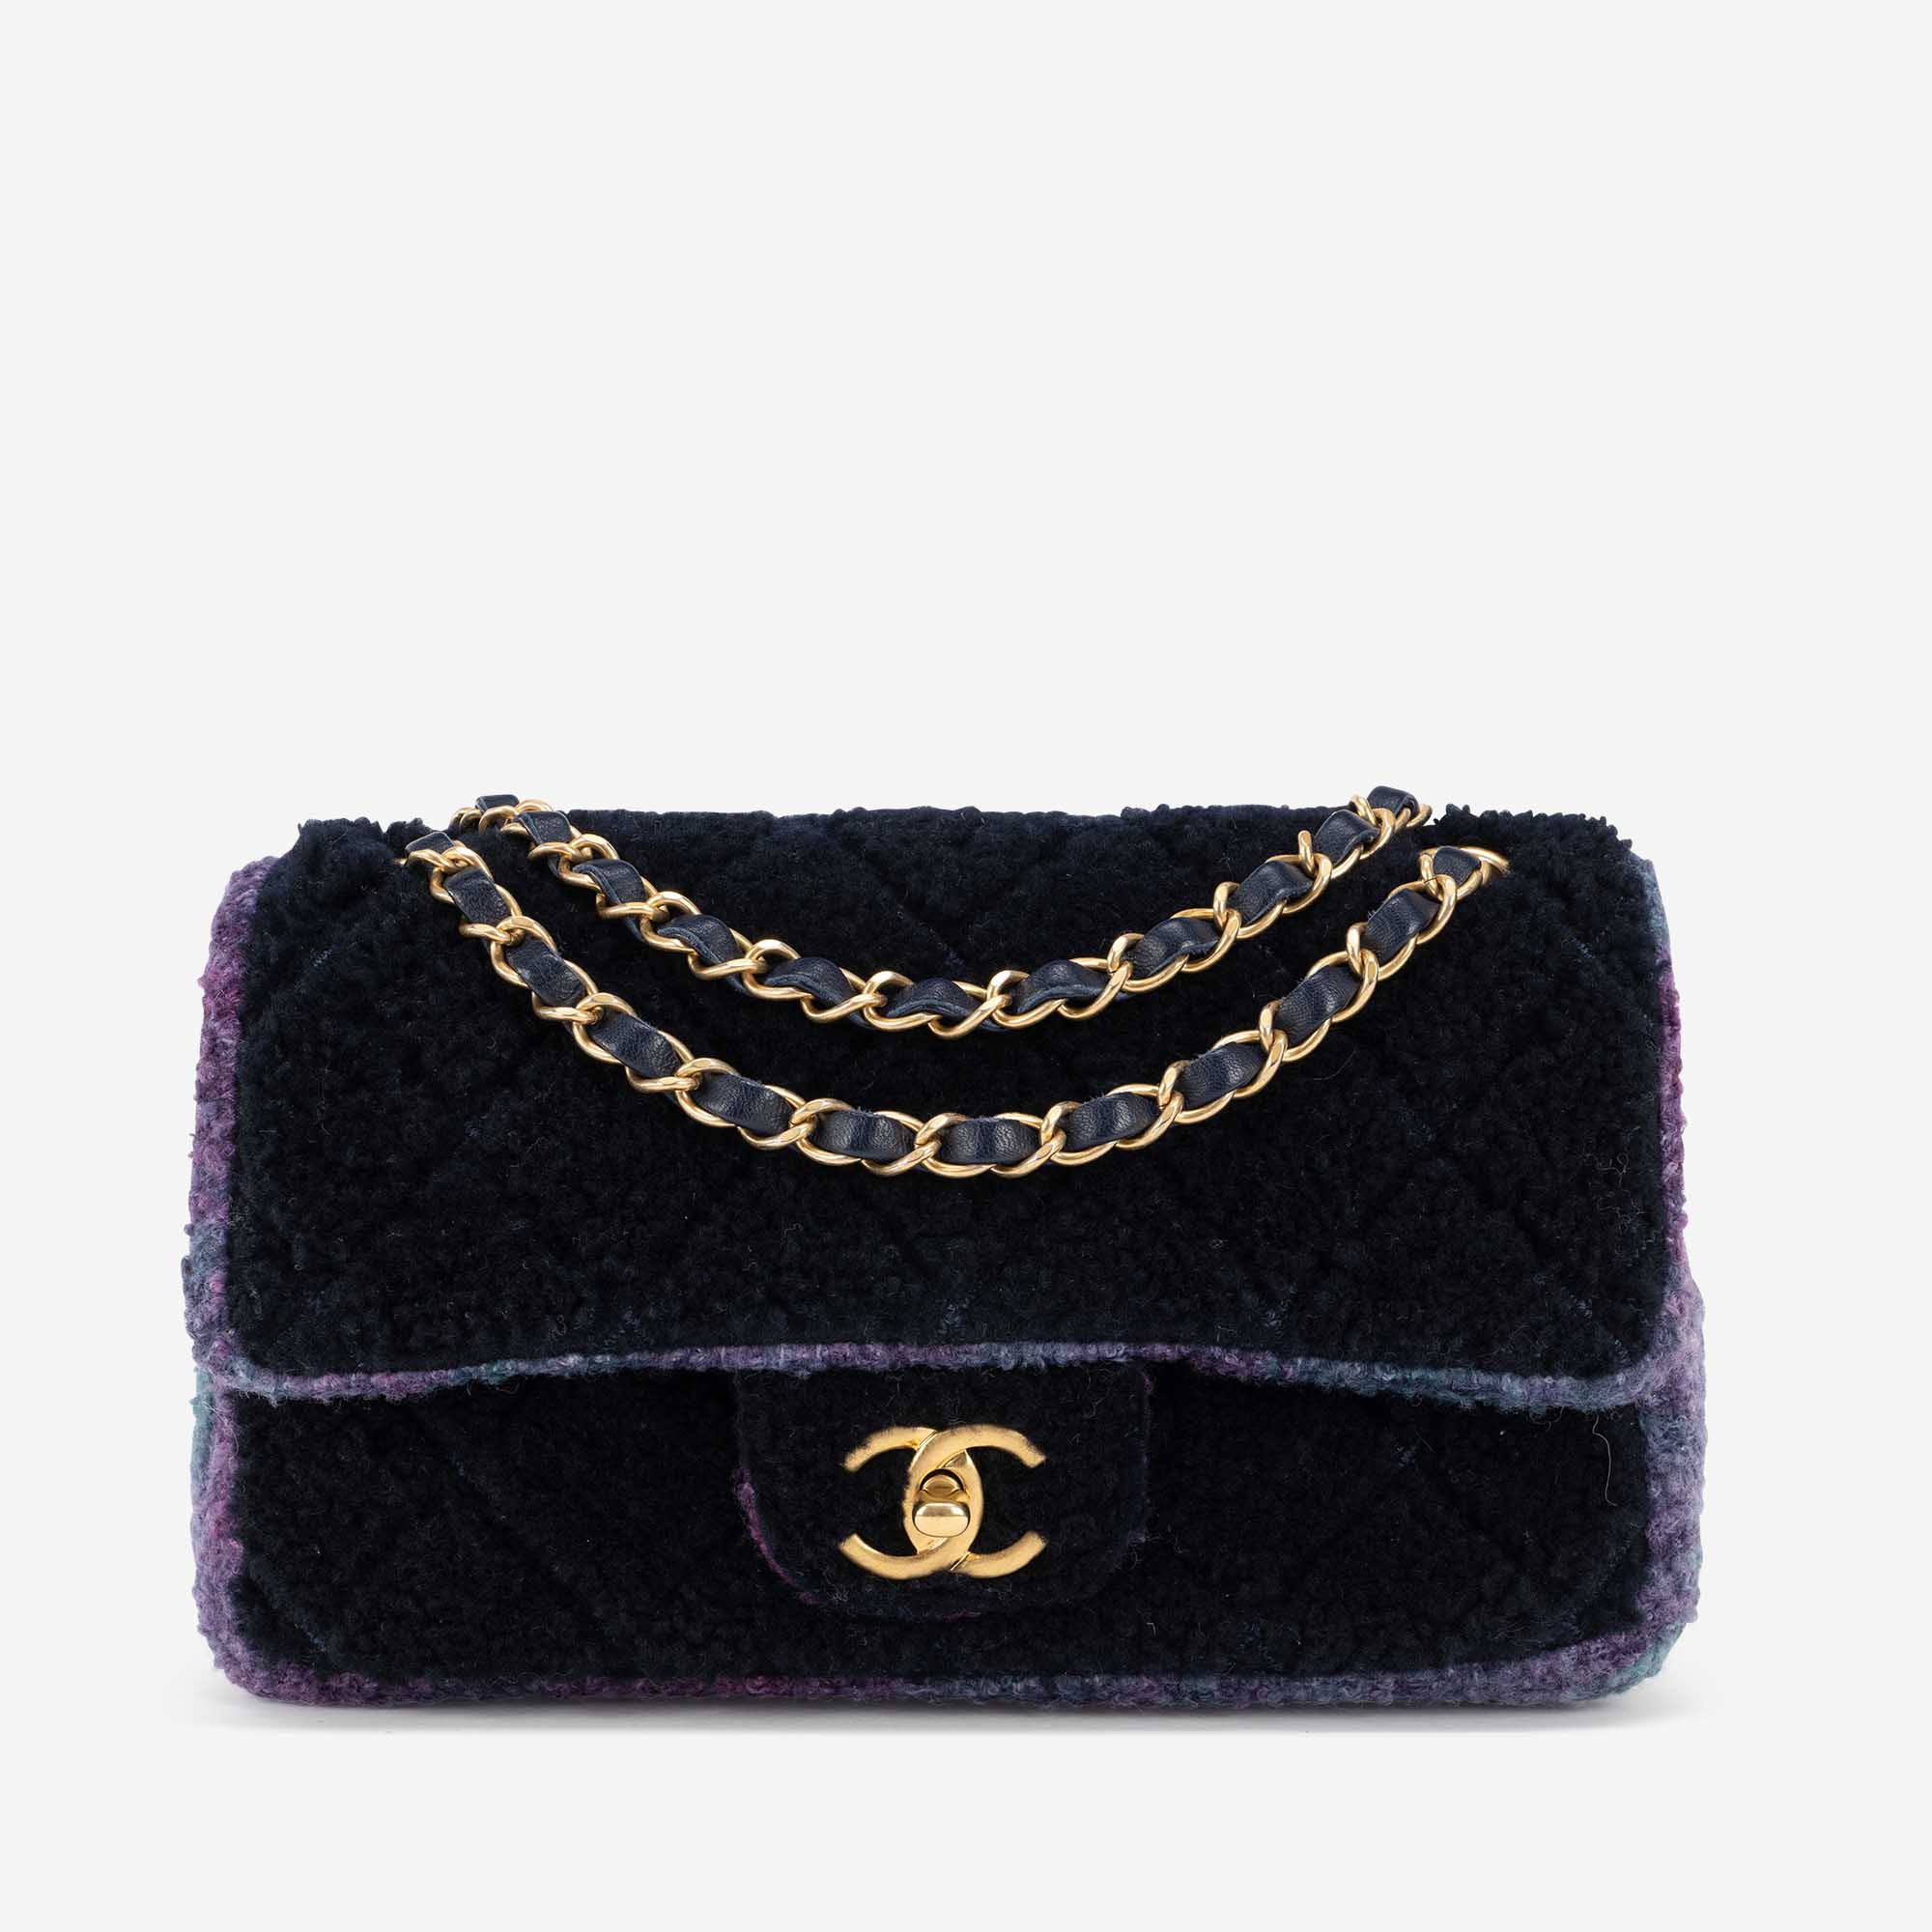 Chanel Fall/Winter 2020 Bag Collection Featuring Diamonds and Pearls -  Spotted Fashion